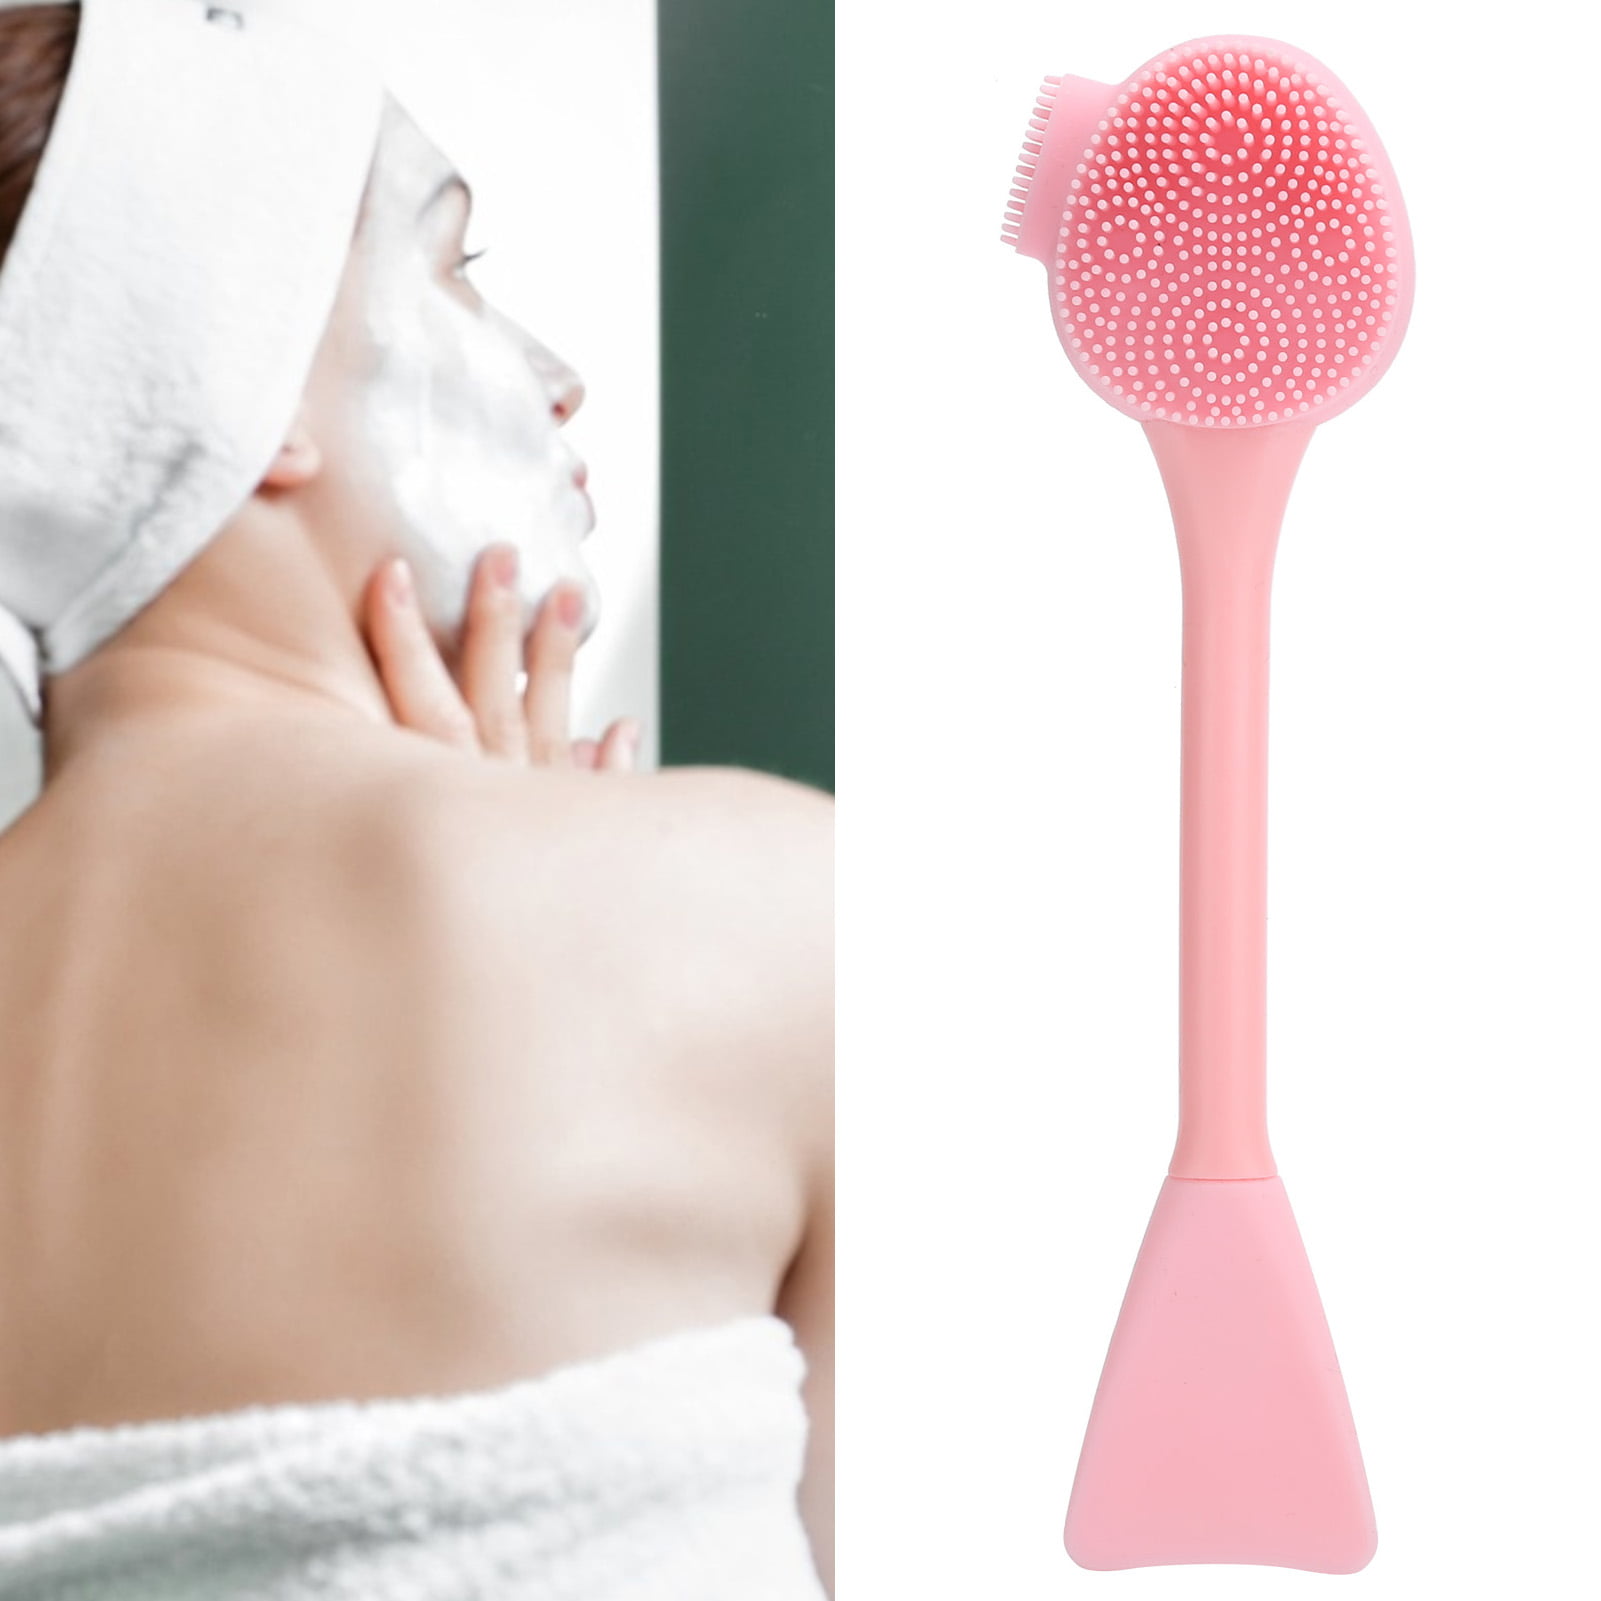 Handheld Silicone Face Cleaning Brush, Mask DIY Mixing Stick Makeup Cleansing BrushPink